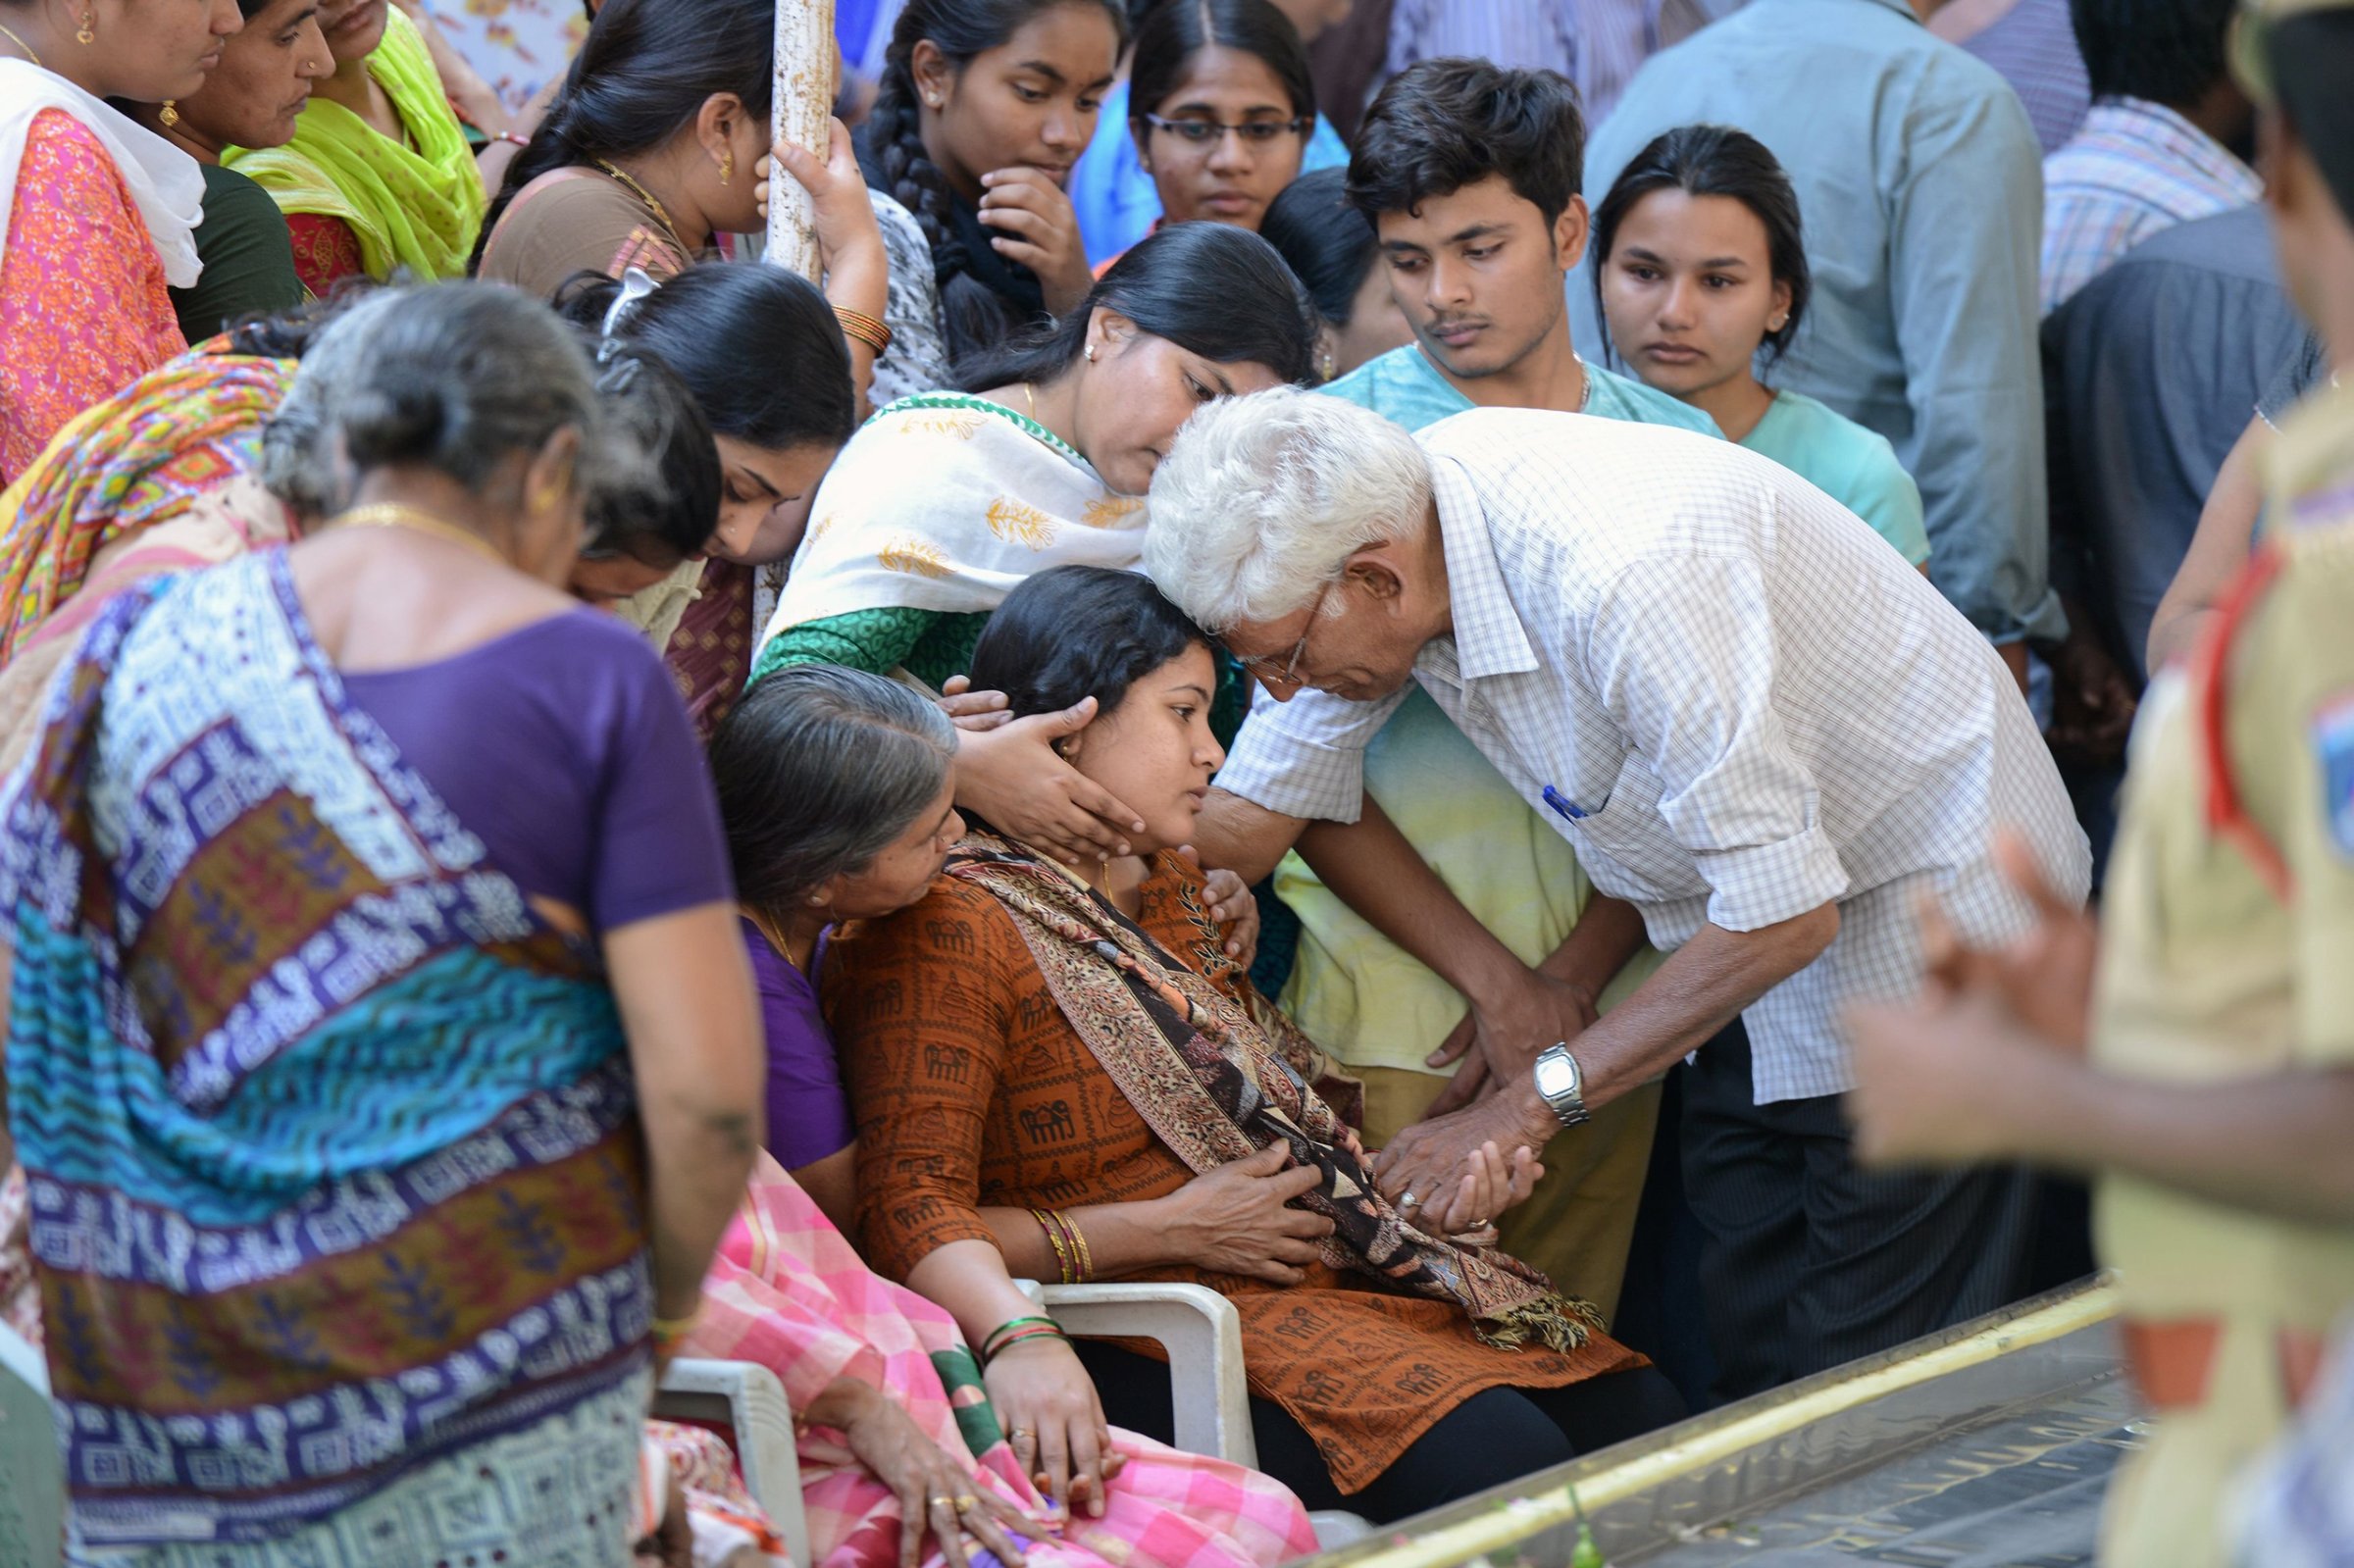 Sunayana Dumala, wife of the Indian engineer, Srinivas Kuchibhotla, who was shot dead in a Kansas bar, is consoled by family members at his funeral in Hyderabad on Feb. 28, 2017.